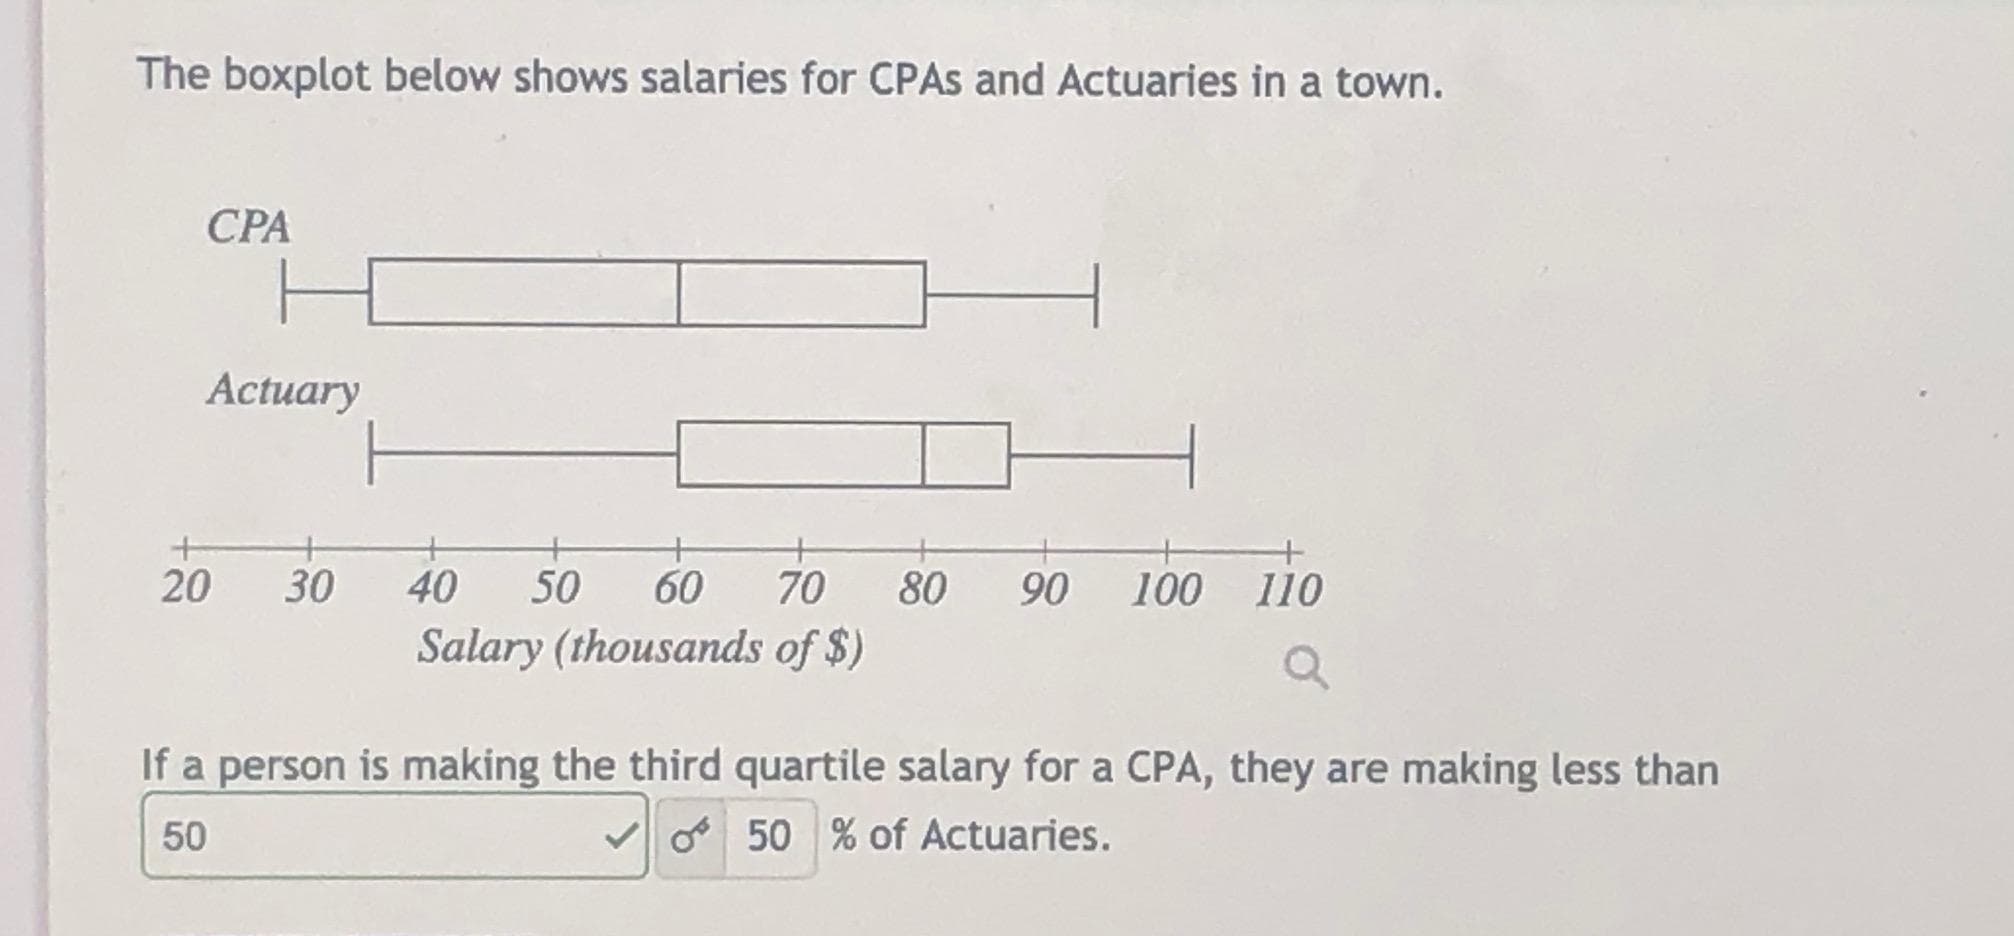 If a person is making the third quartile salary for a CPA, they are making less than
50
V o 50 % of Actuaries.
